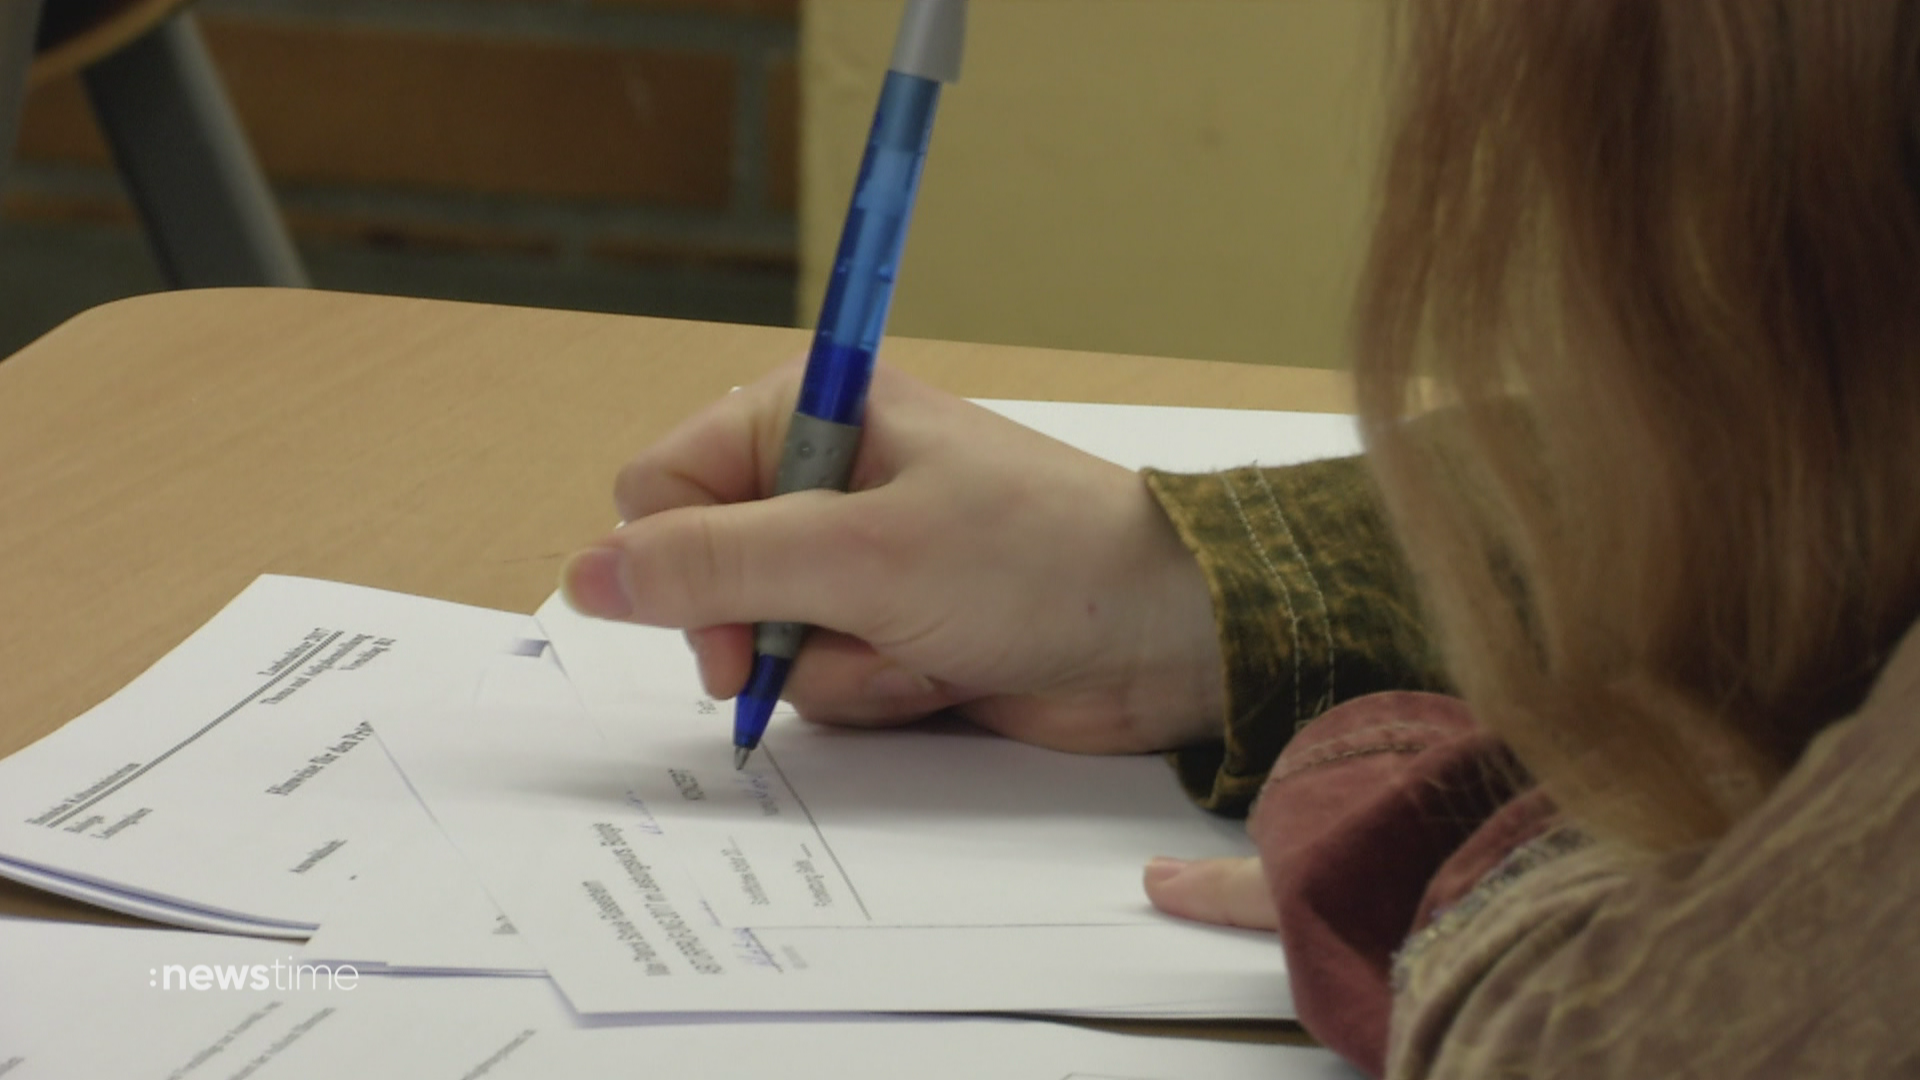 Abitur examinations in Hesse: Points deducted for gender-sensitive language